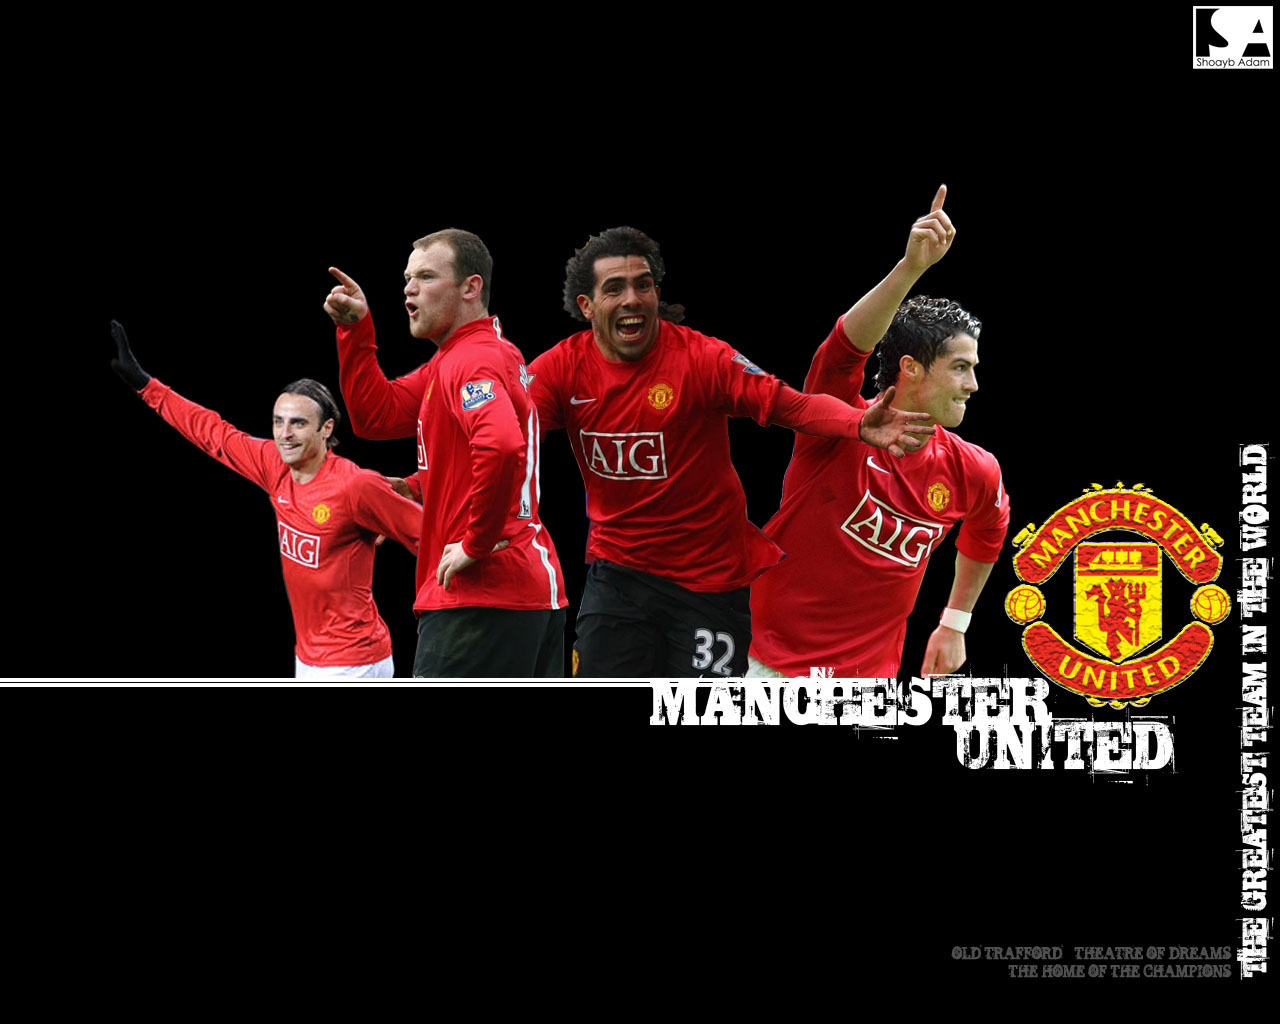 Manchester United: King of Europe Manchester United